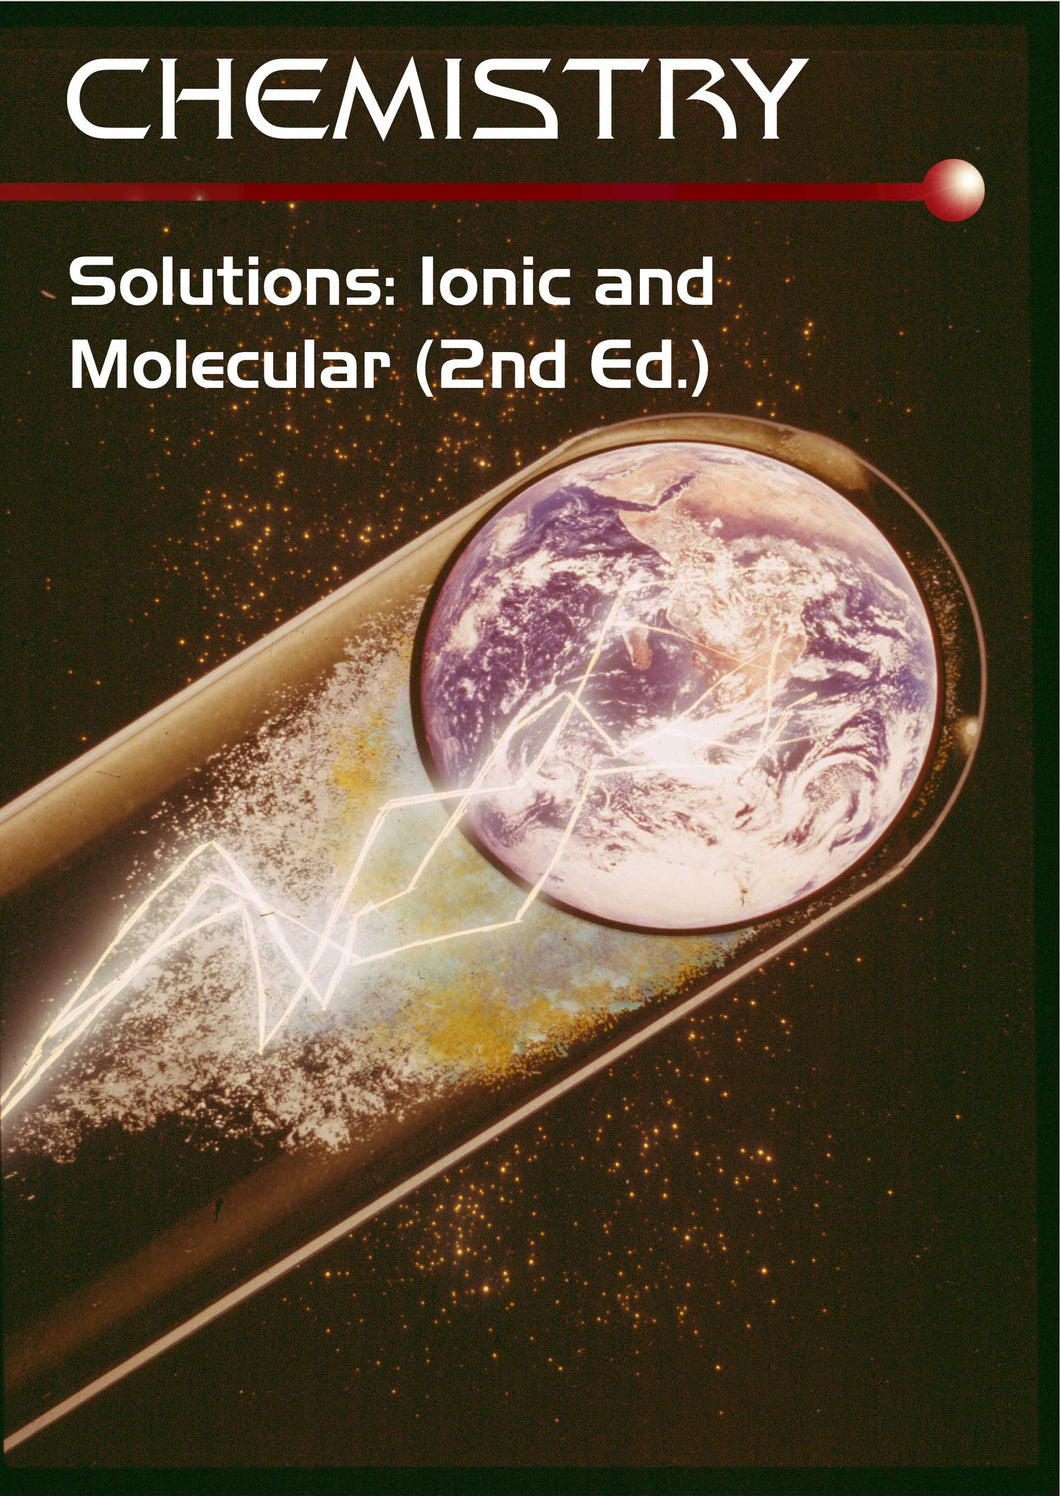 Chemistry Series:  Solutions: Iconic & Molecular